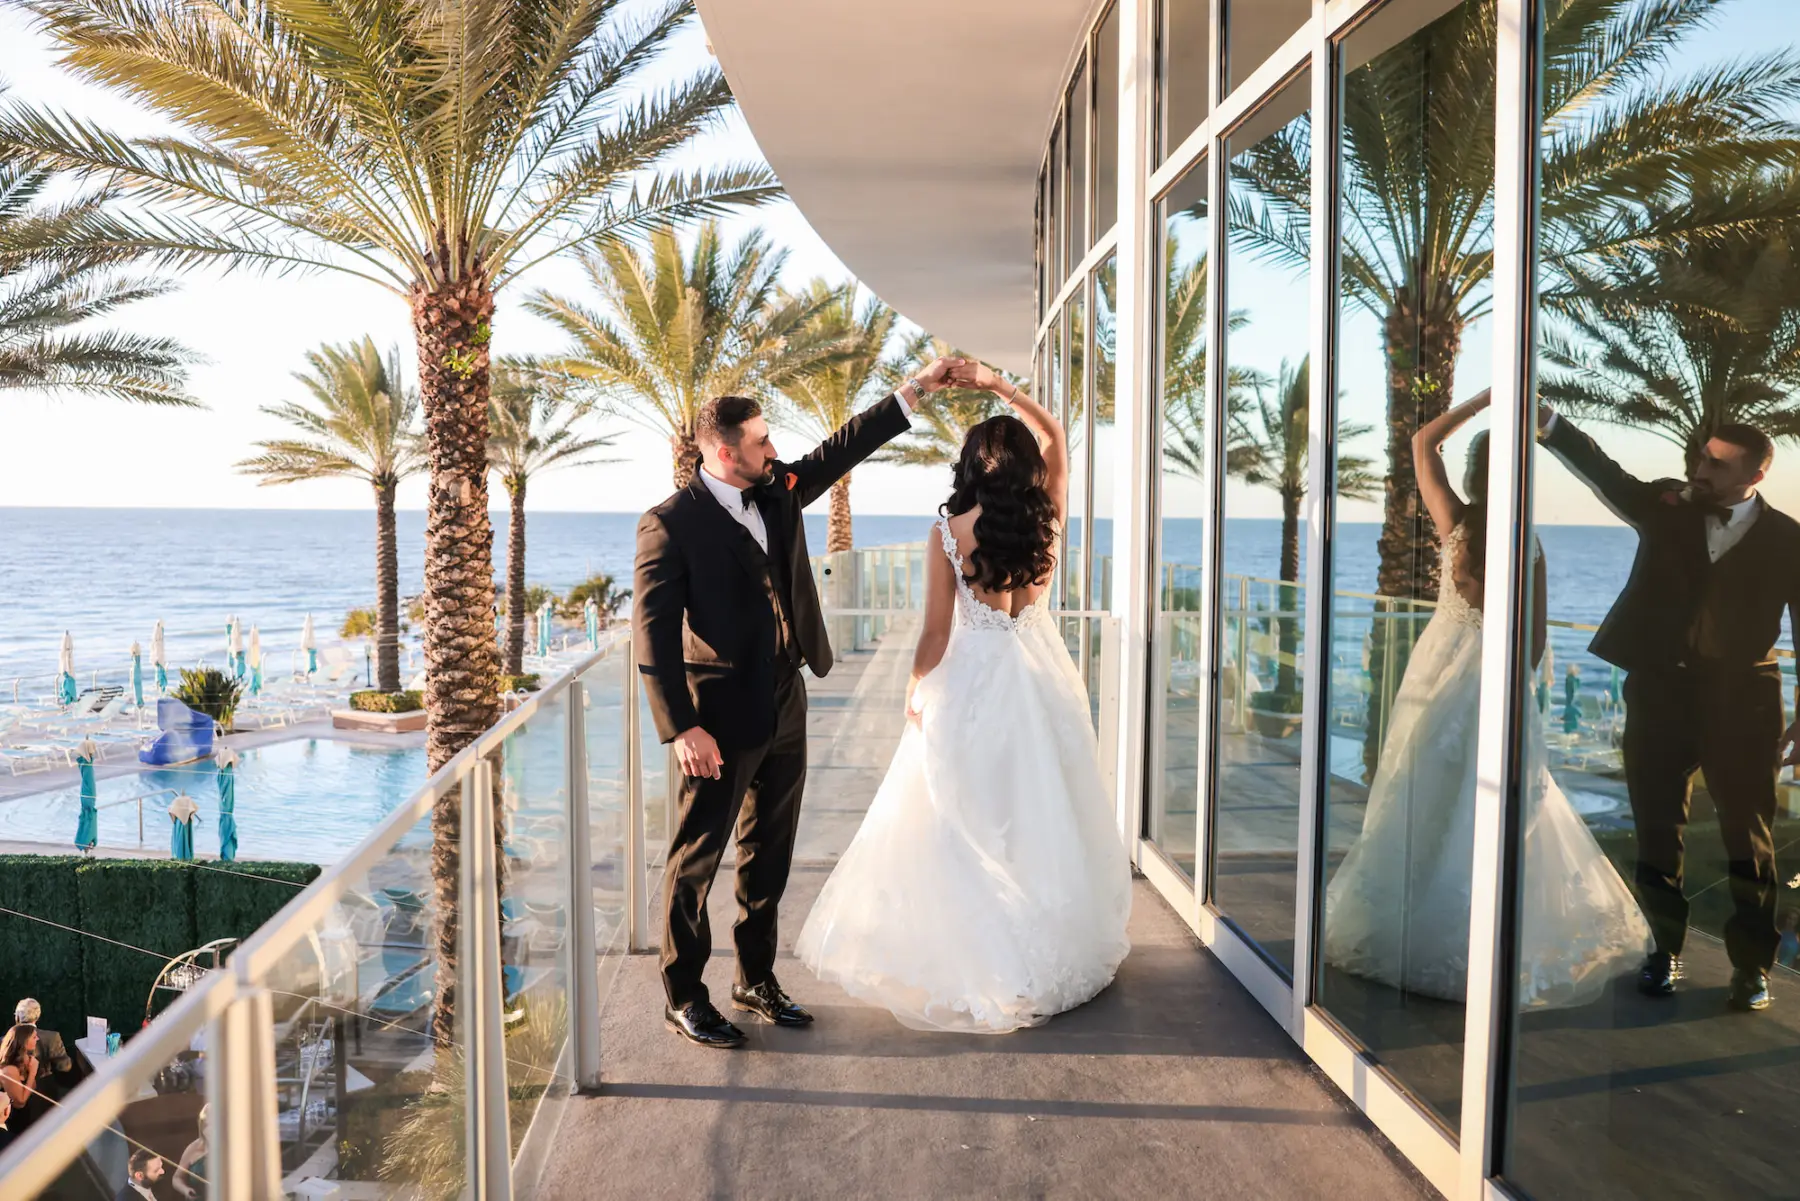 Bride and Groom Private First Dance Wedding Portrait | Clearwater Beach Wedding Inspiration | Clearwater Photographer Lifelong Photography Studio | Venue Opal Sands